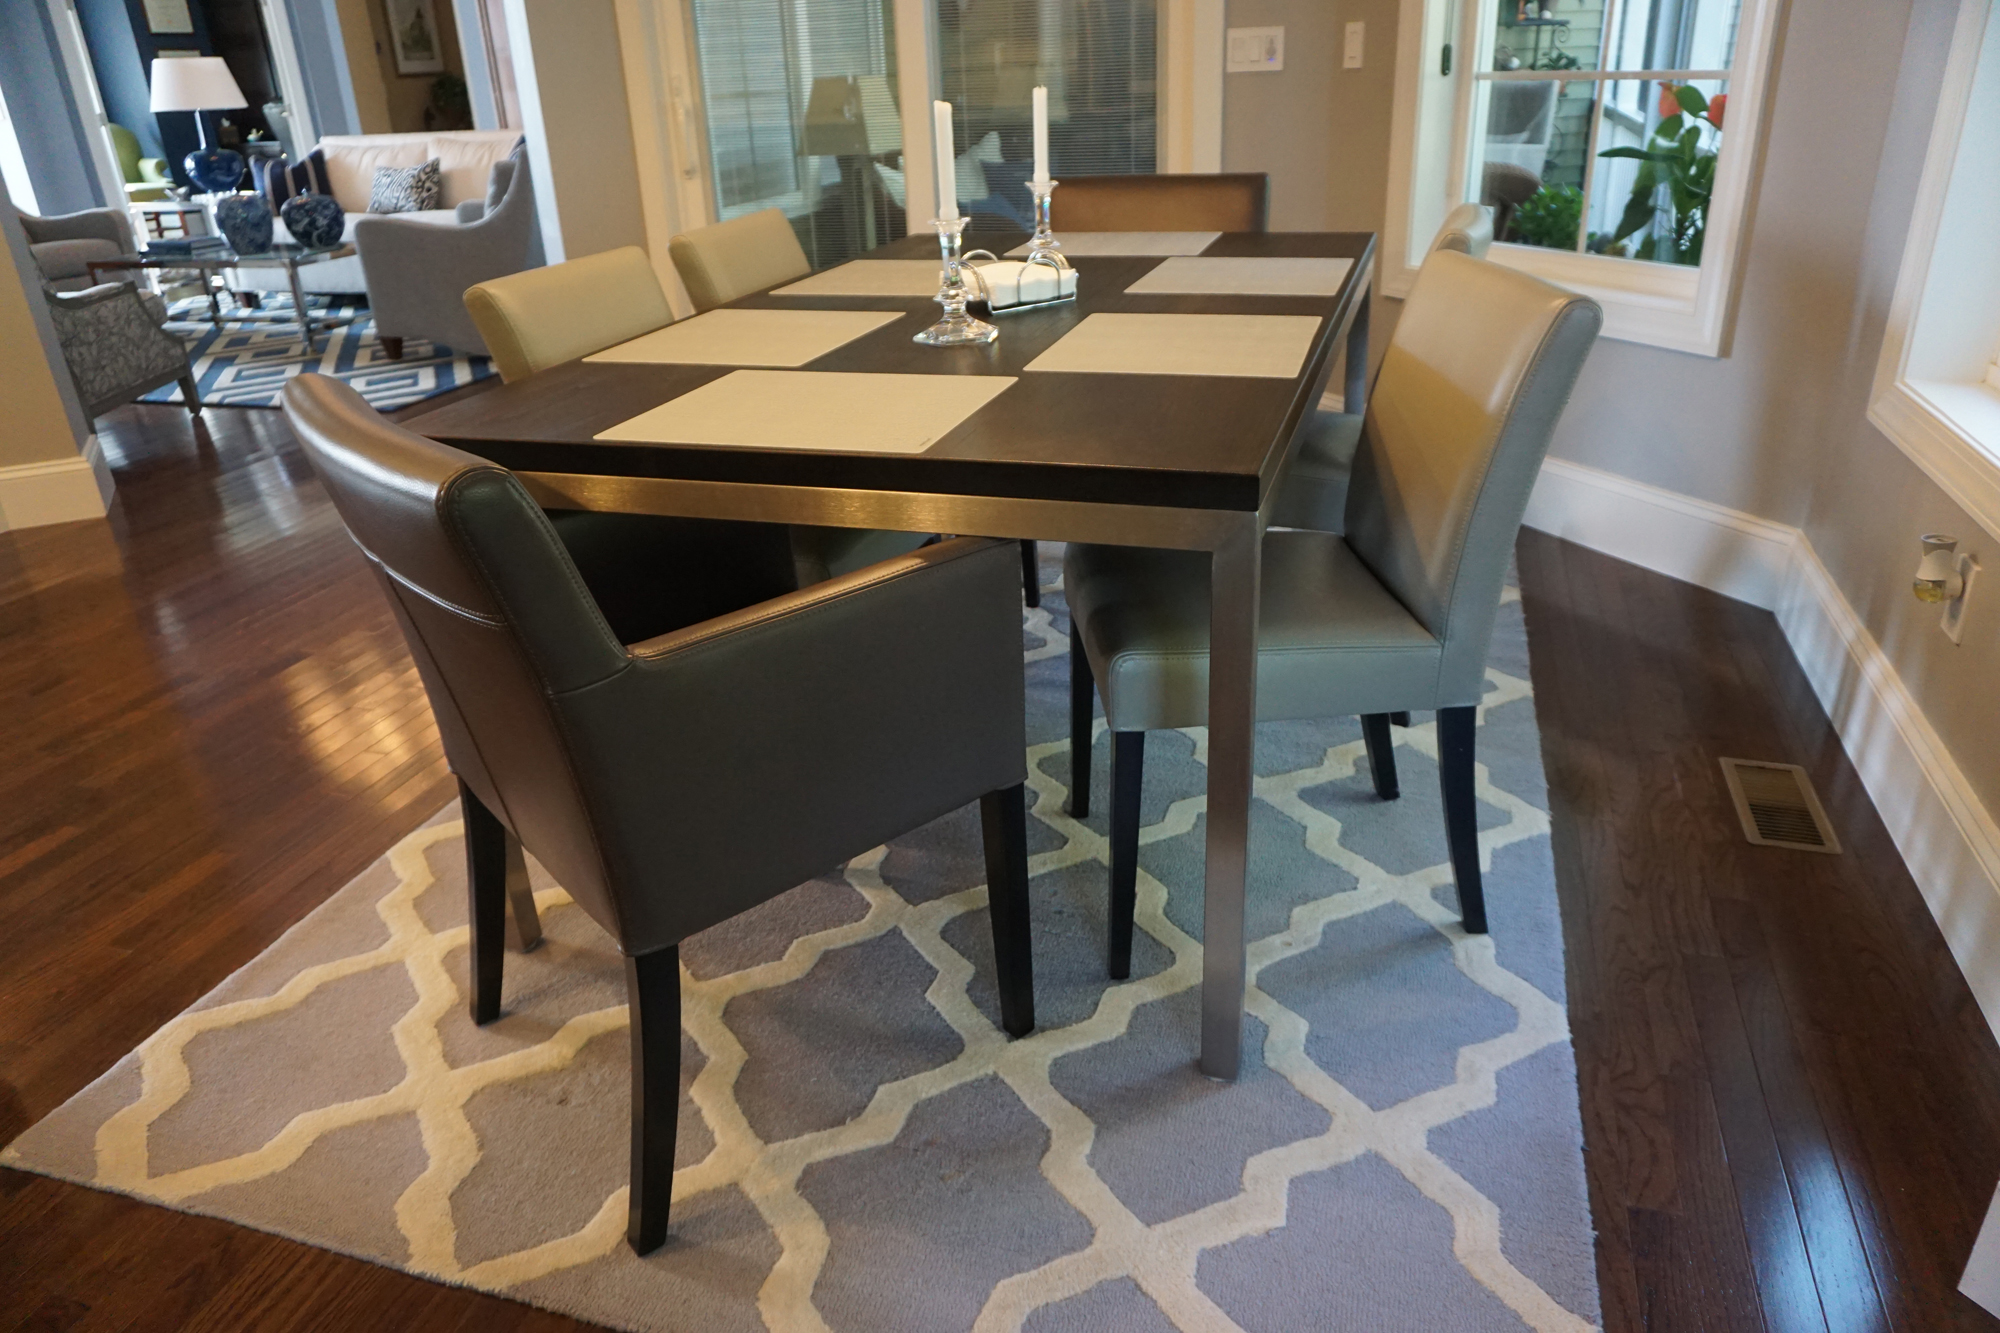 a dining room table with chairs and a rug